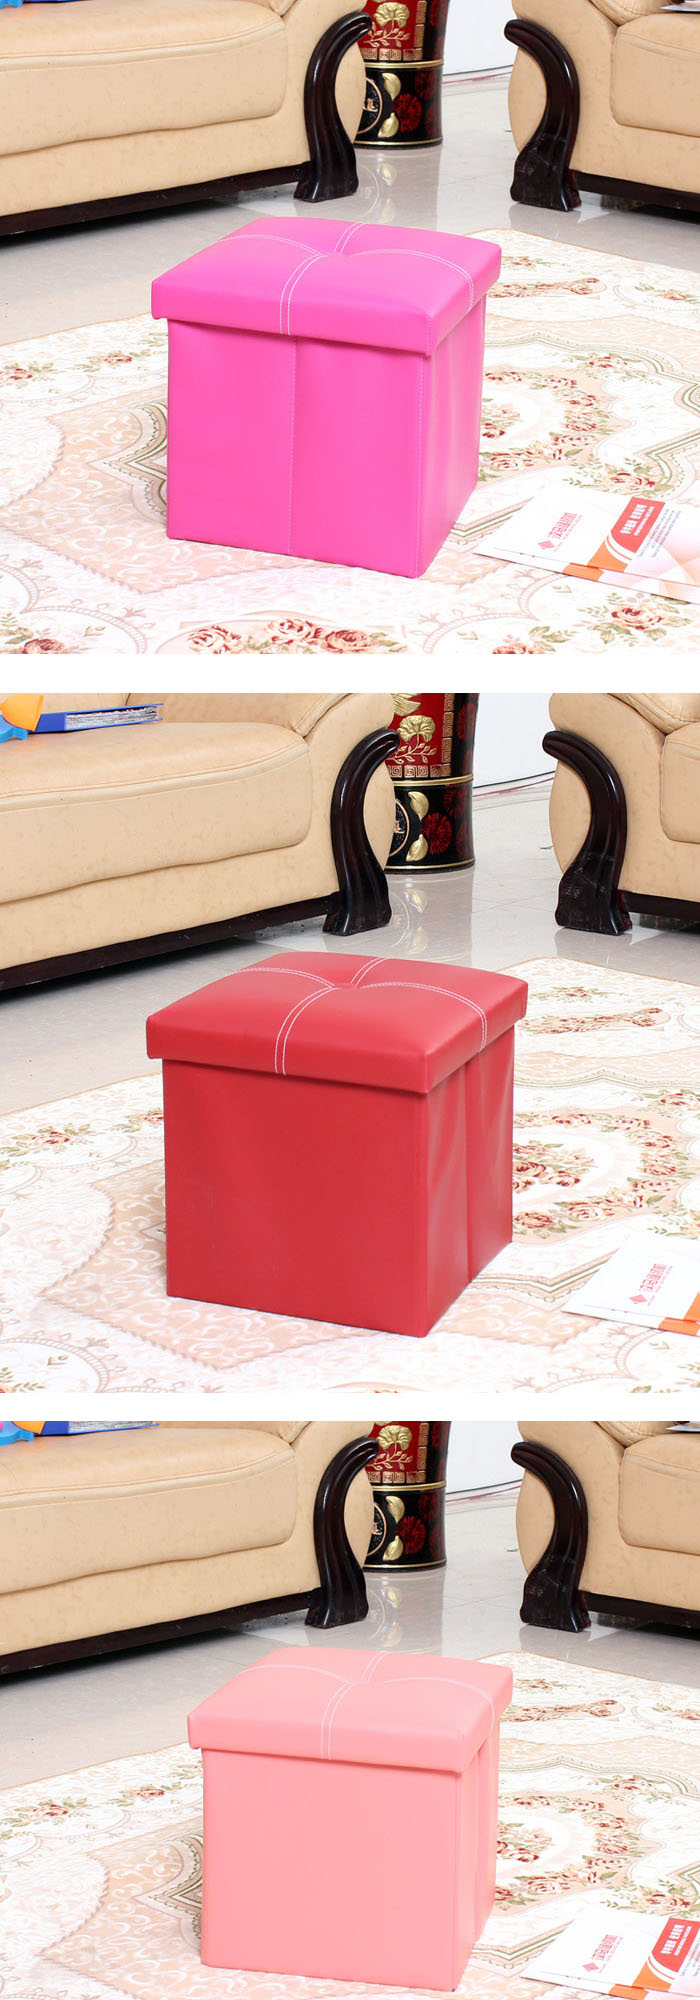 Multifunctional Folding Storage Chair Box Shoes Toys Storage Chair Home Furniture